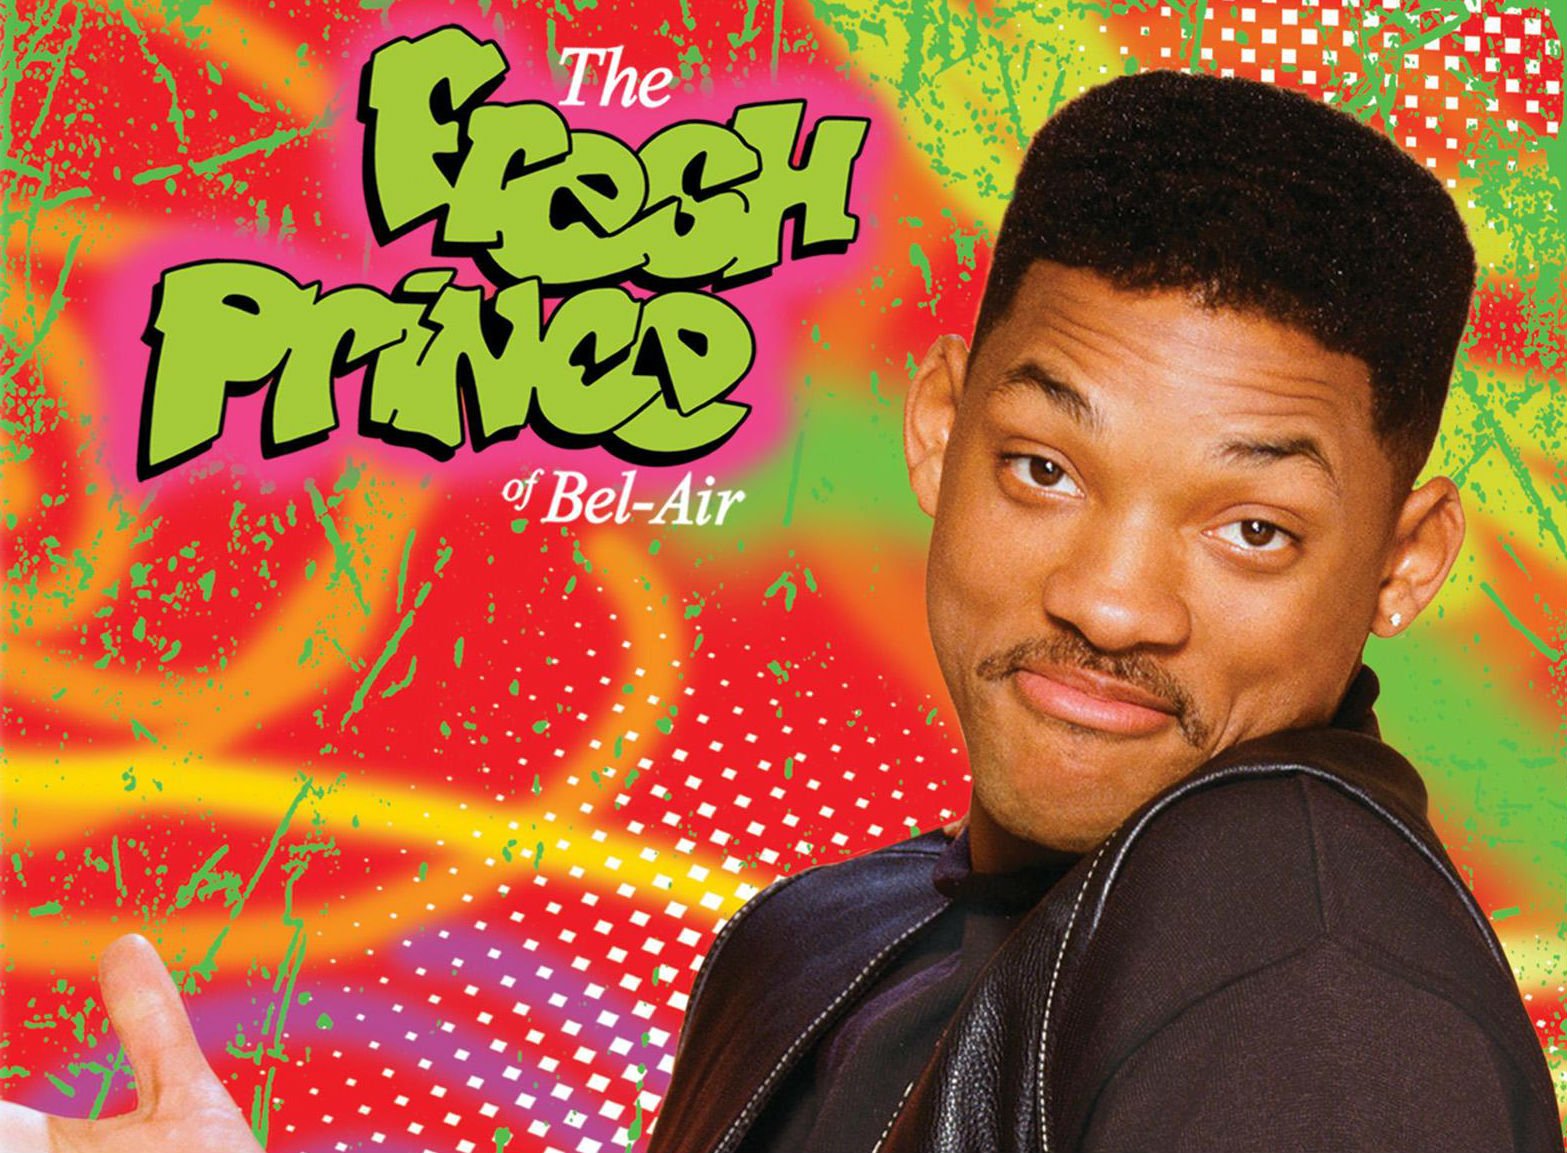 334587 Fresh Prince Of Bel Air Comedy Sitcom Series Television Will Smith Fresh Prince Bel Air Poster 